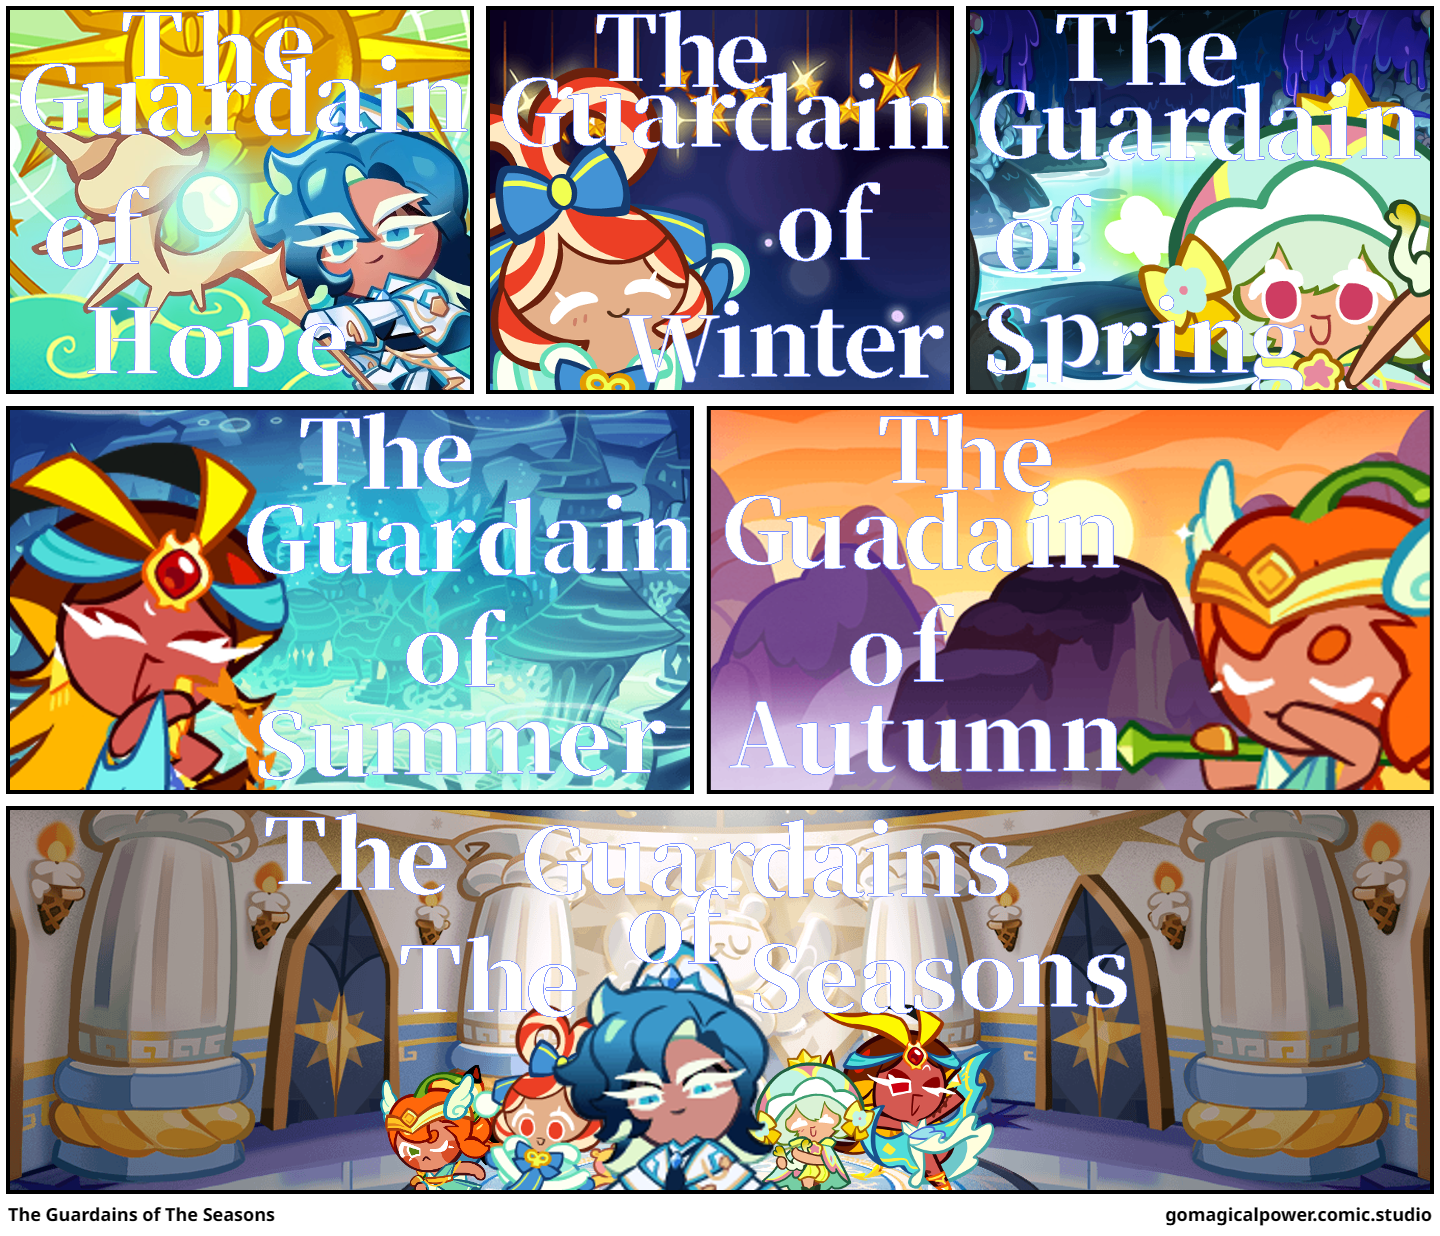 The Guardains of The Seasons